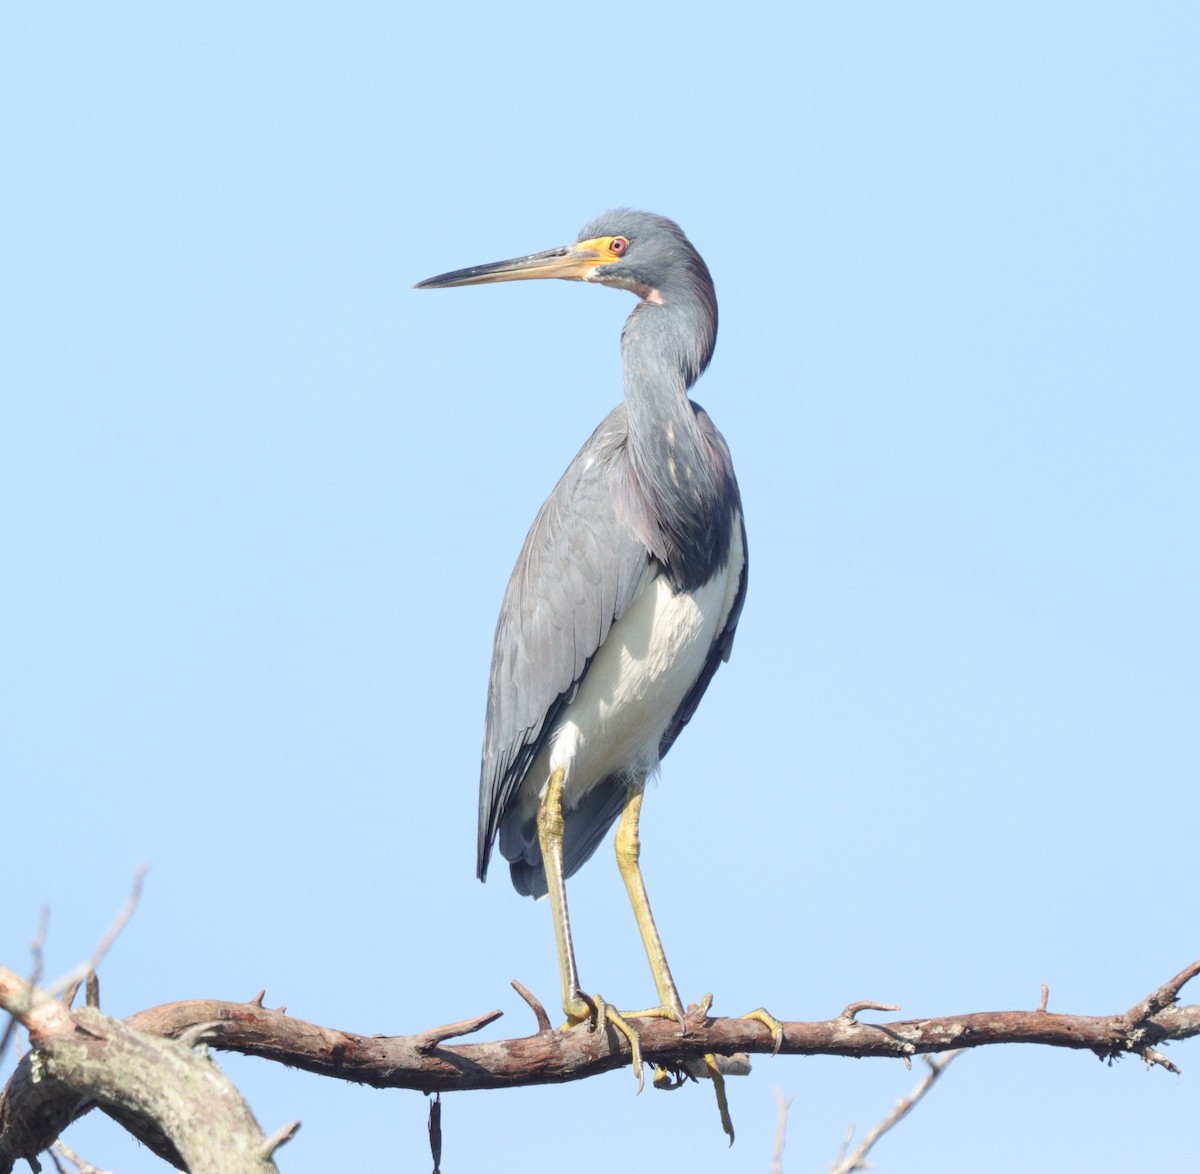 Tricolored Heron - Daphne Asbell